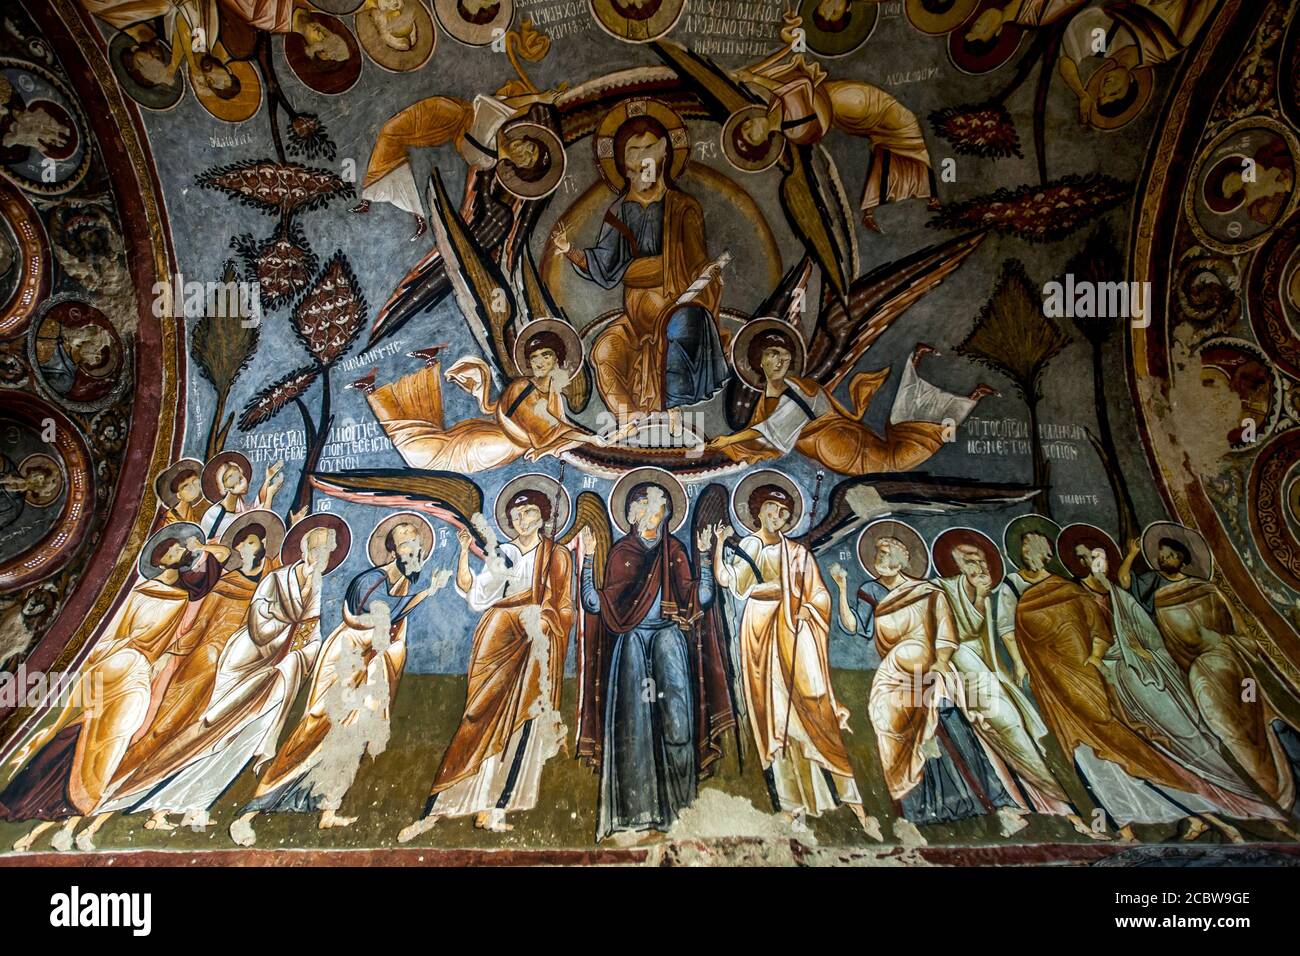 A beautiful fresco showing Christ with The Virgin and the Archangels at the Karanlik Kilise (Dark Church) at the Open Air Museum at Goreme in Turkey. Stock Photo